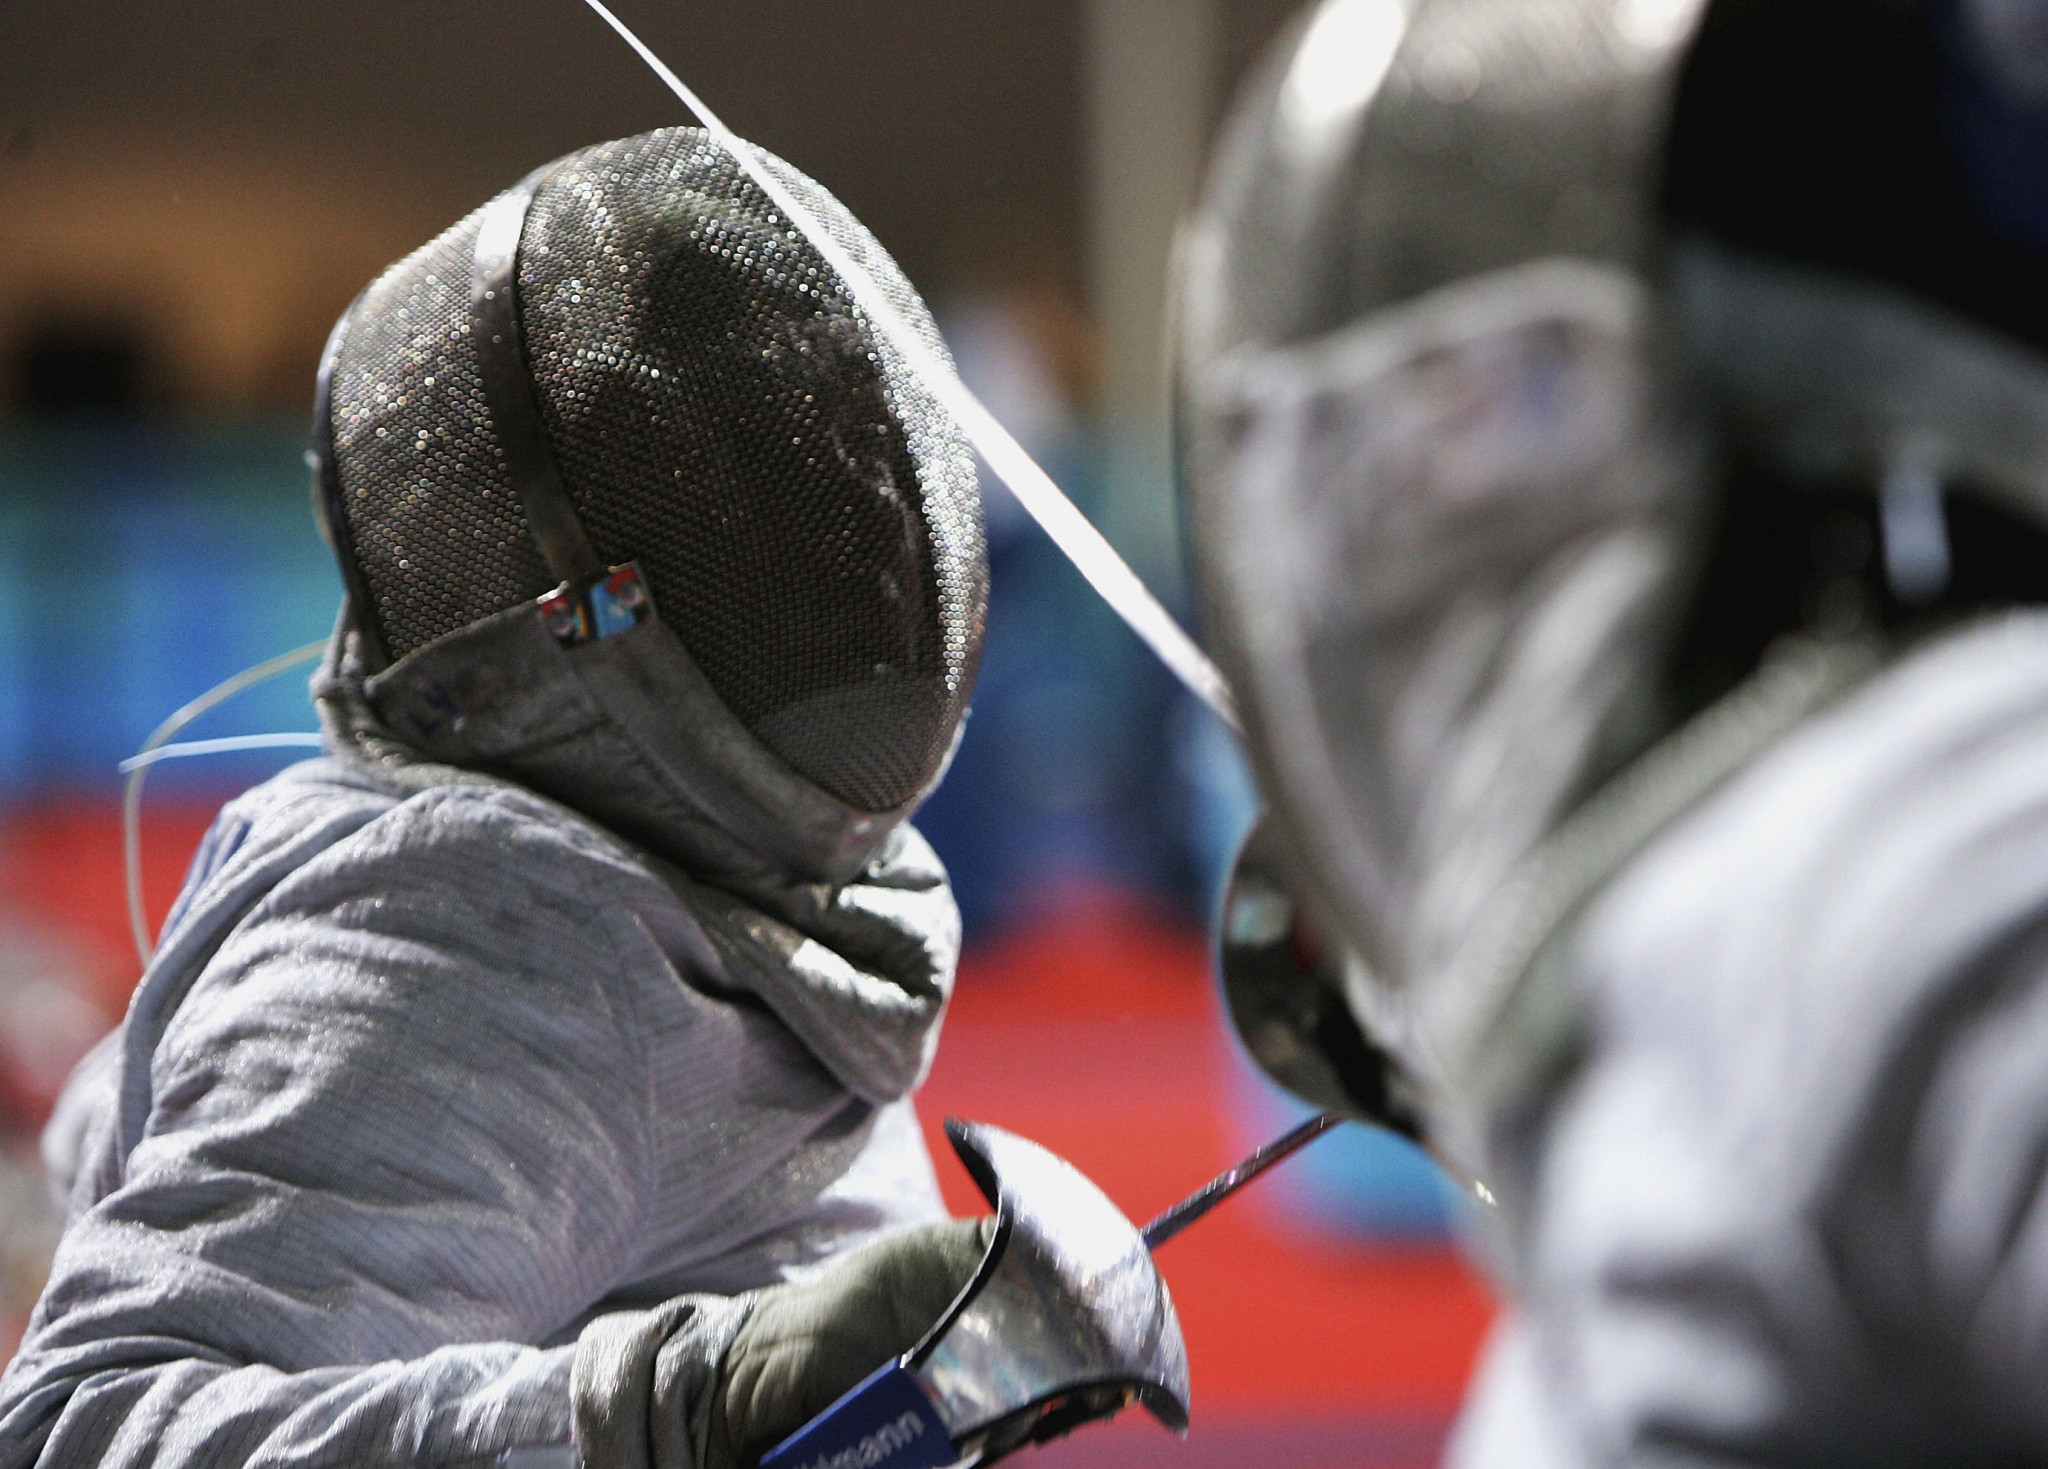 IWAS Wheelchair Fencing has appointed new Commissions ©Getty Images